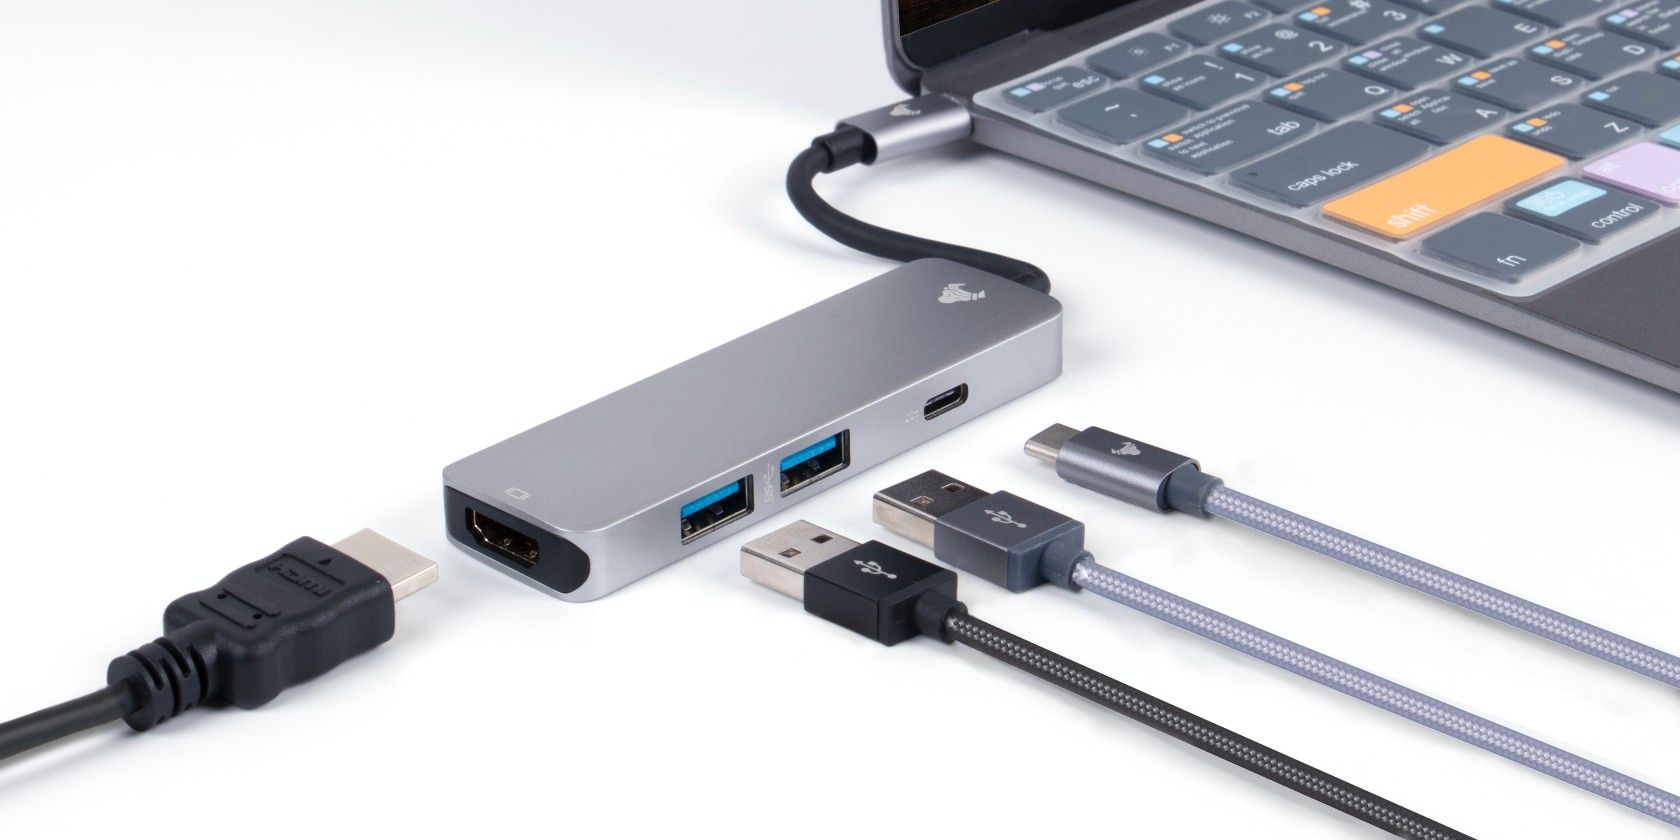 A USB-C hub connected to a laptop